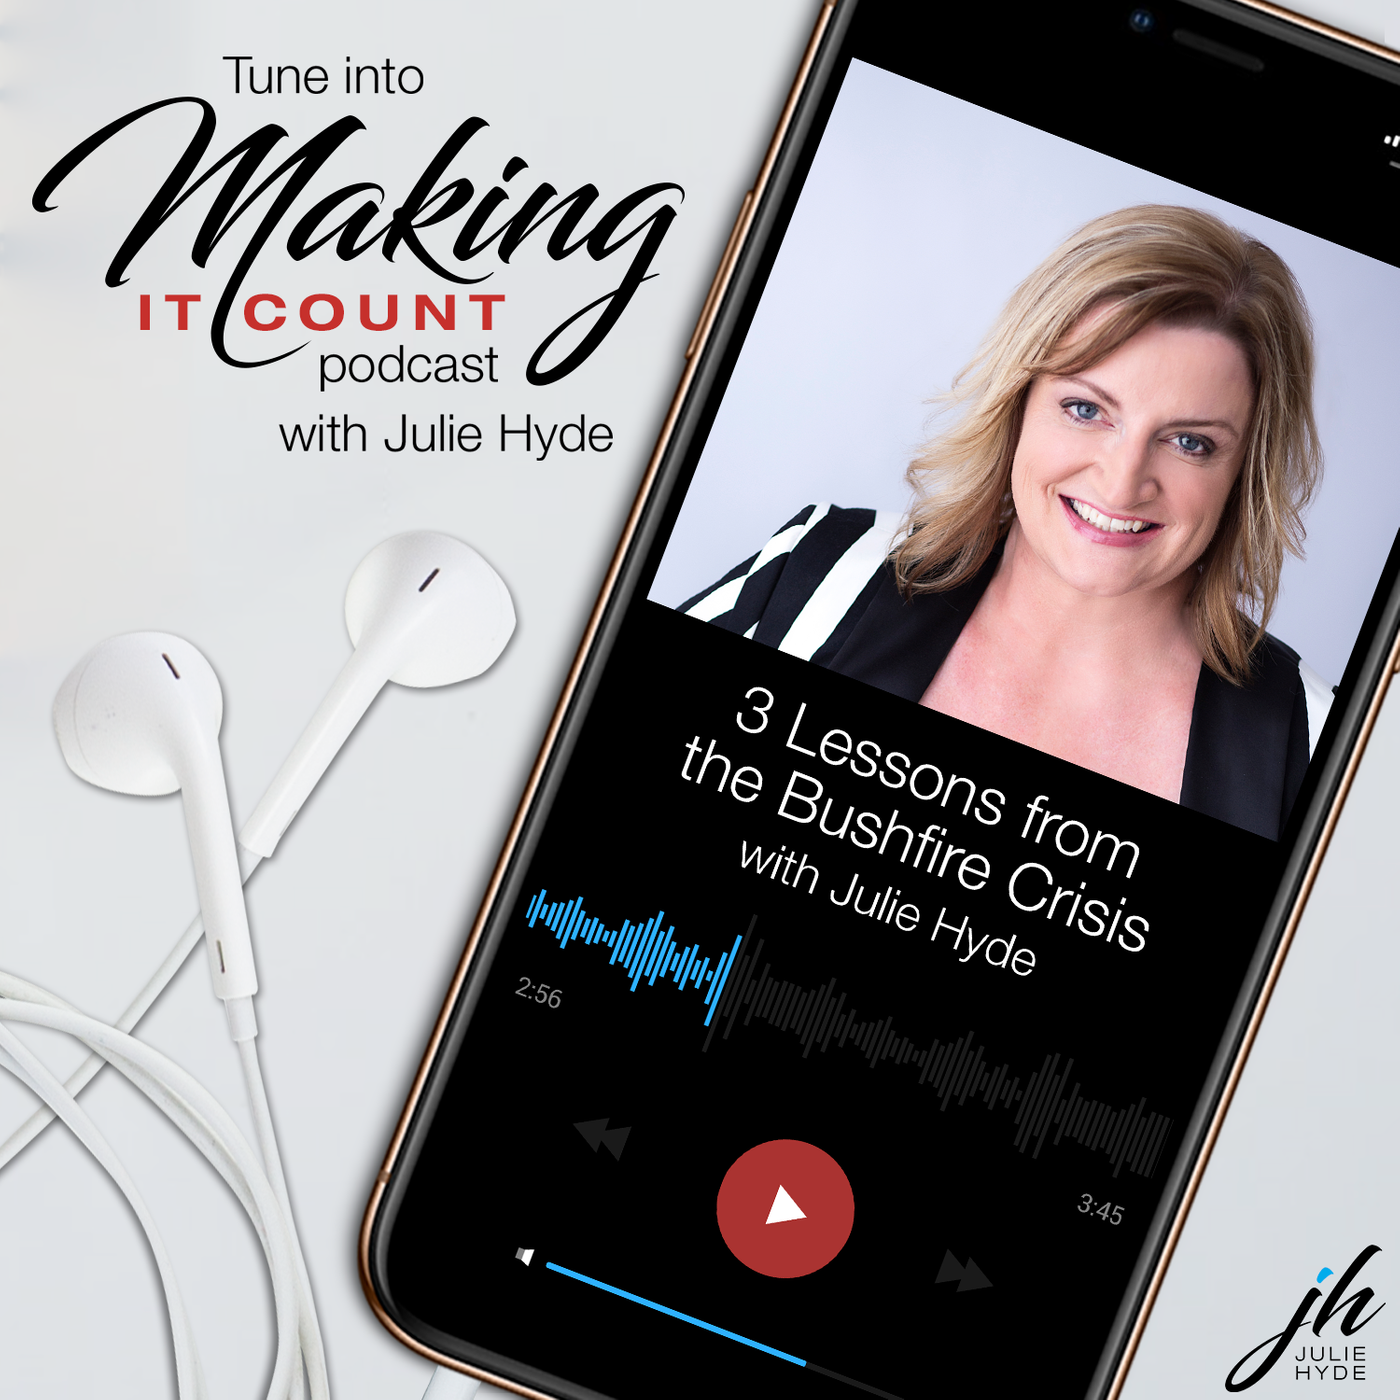 lessons-from-bushfire-crisis-julie-hyde-making-it-count-busy-leadership-leader-leaders-keynote-mindset-speaker-mentor-business-empower-lead-empowering-podcast-great-intentional-authentic-mentor-coach-role-model-top-best-inspire-engage-practical-insightful-boost-performance-tips-how-to-strategy-powerful-change-mindset-thrive-results-corporate-future-smart-program-mentorship-career-next-level-step-reconnect-control-proactive-agile-adaptable-one-on-one-woman-lady-boss-female-sydney-australia-speaker-host-guide-guidance-business-ceo-management